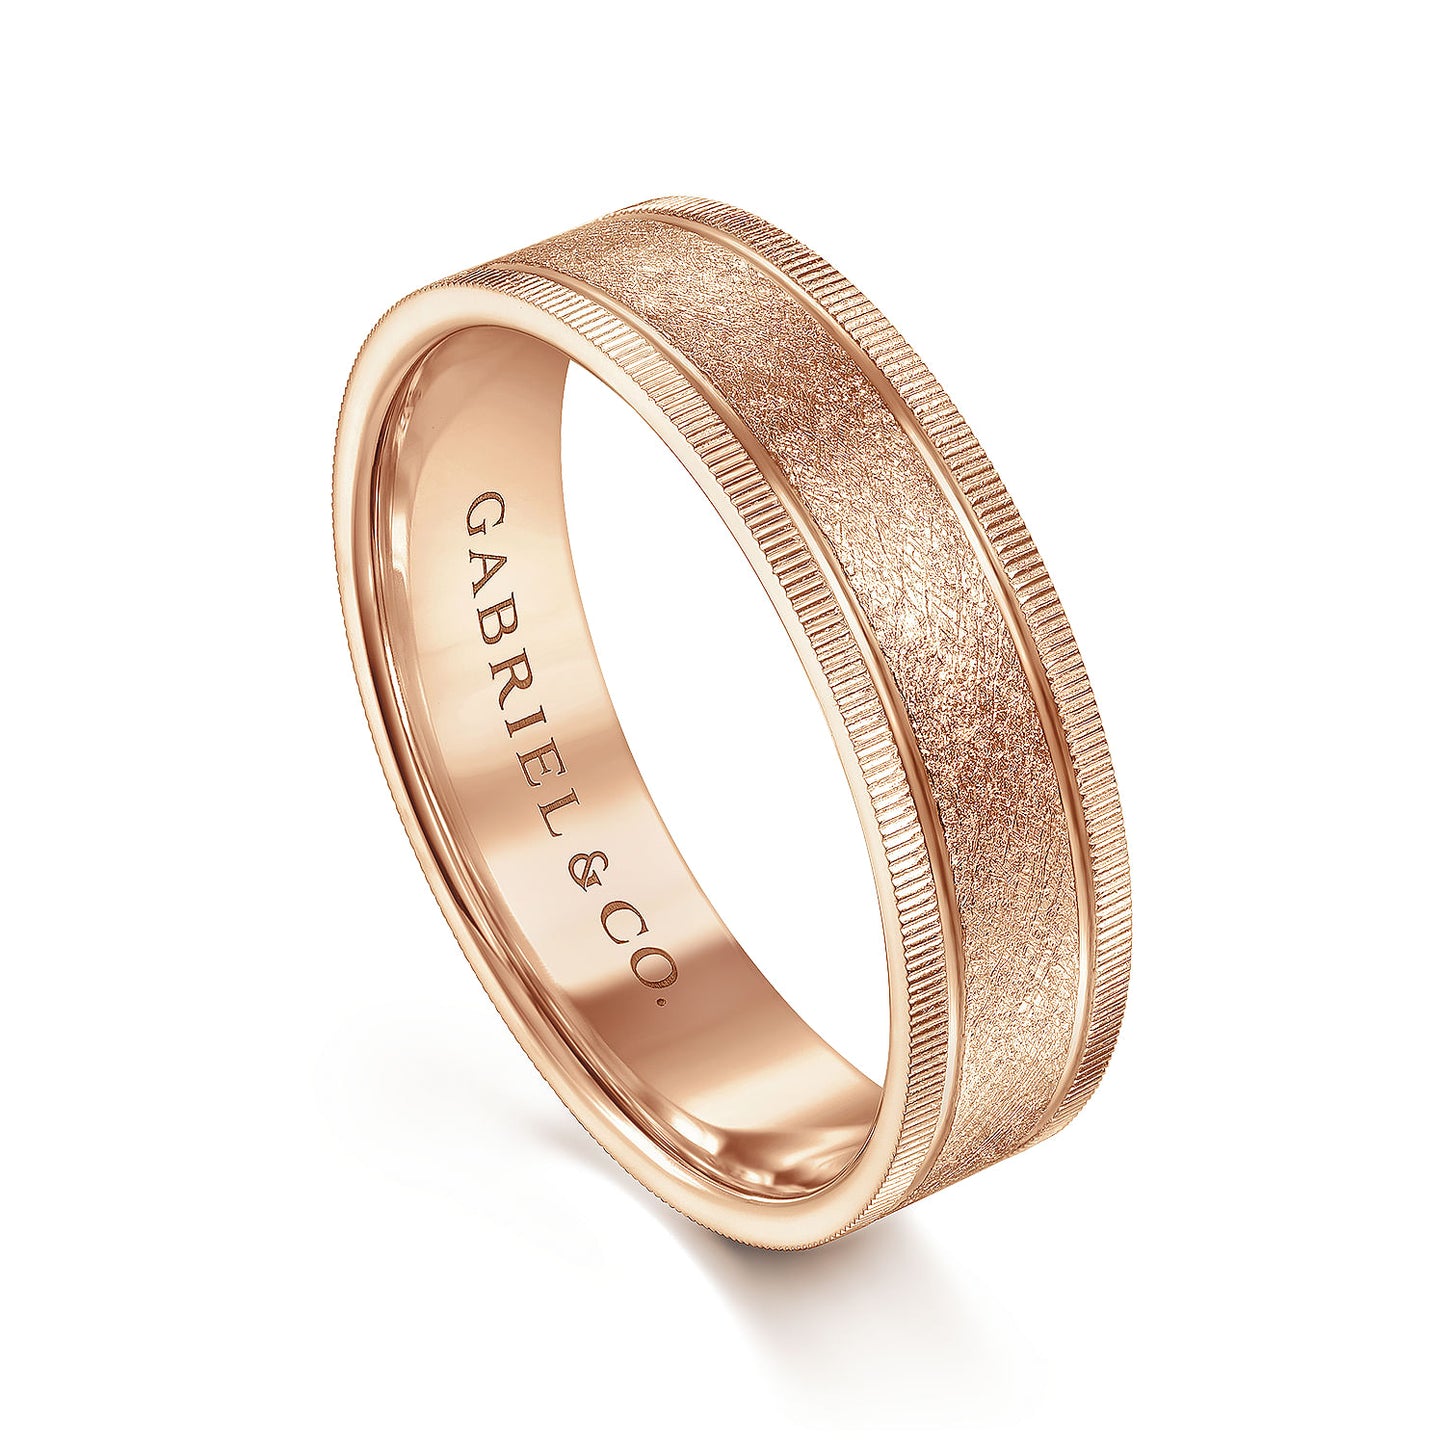 Gabriel & Co Rose Gold Wedding Band With A Sandblasted Center And Diamond Cut Edges - Gold Wedding Bands - Men's